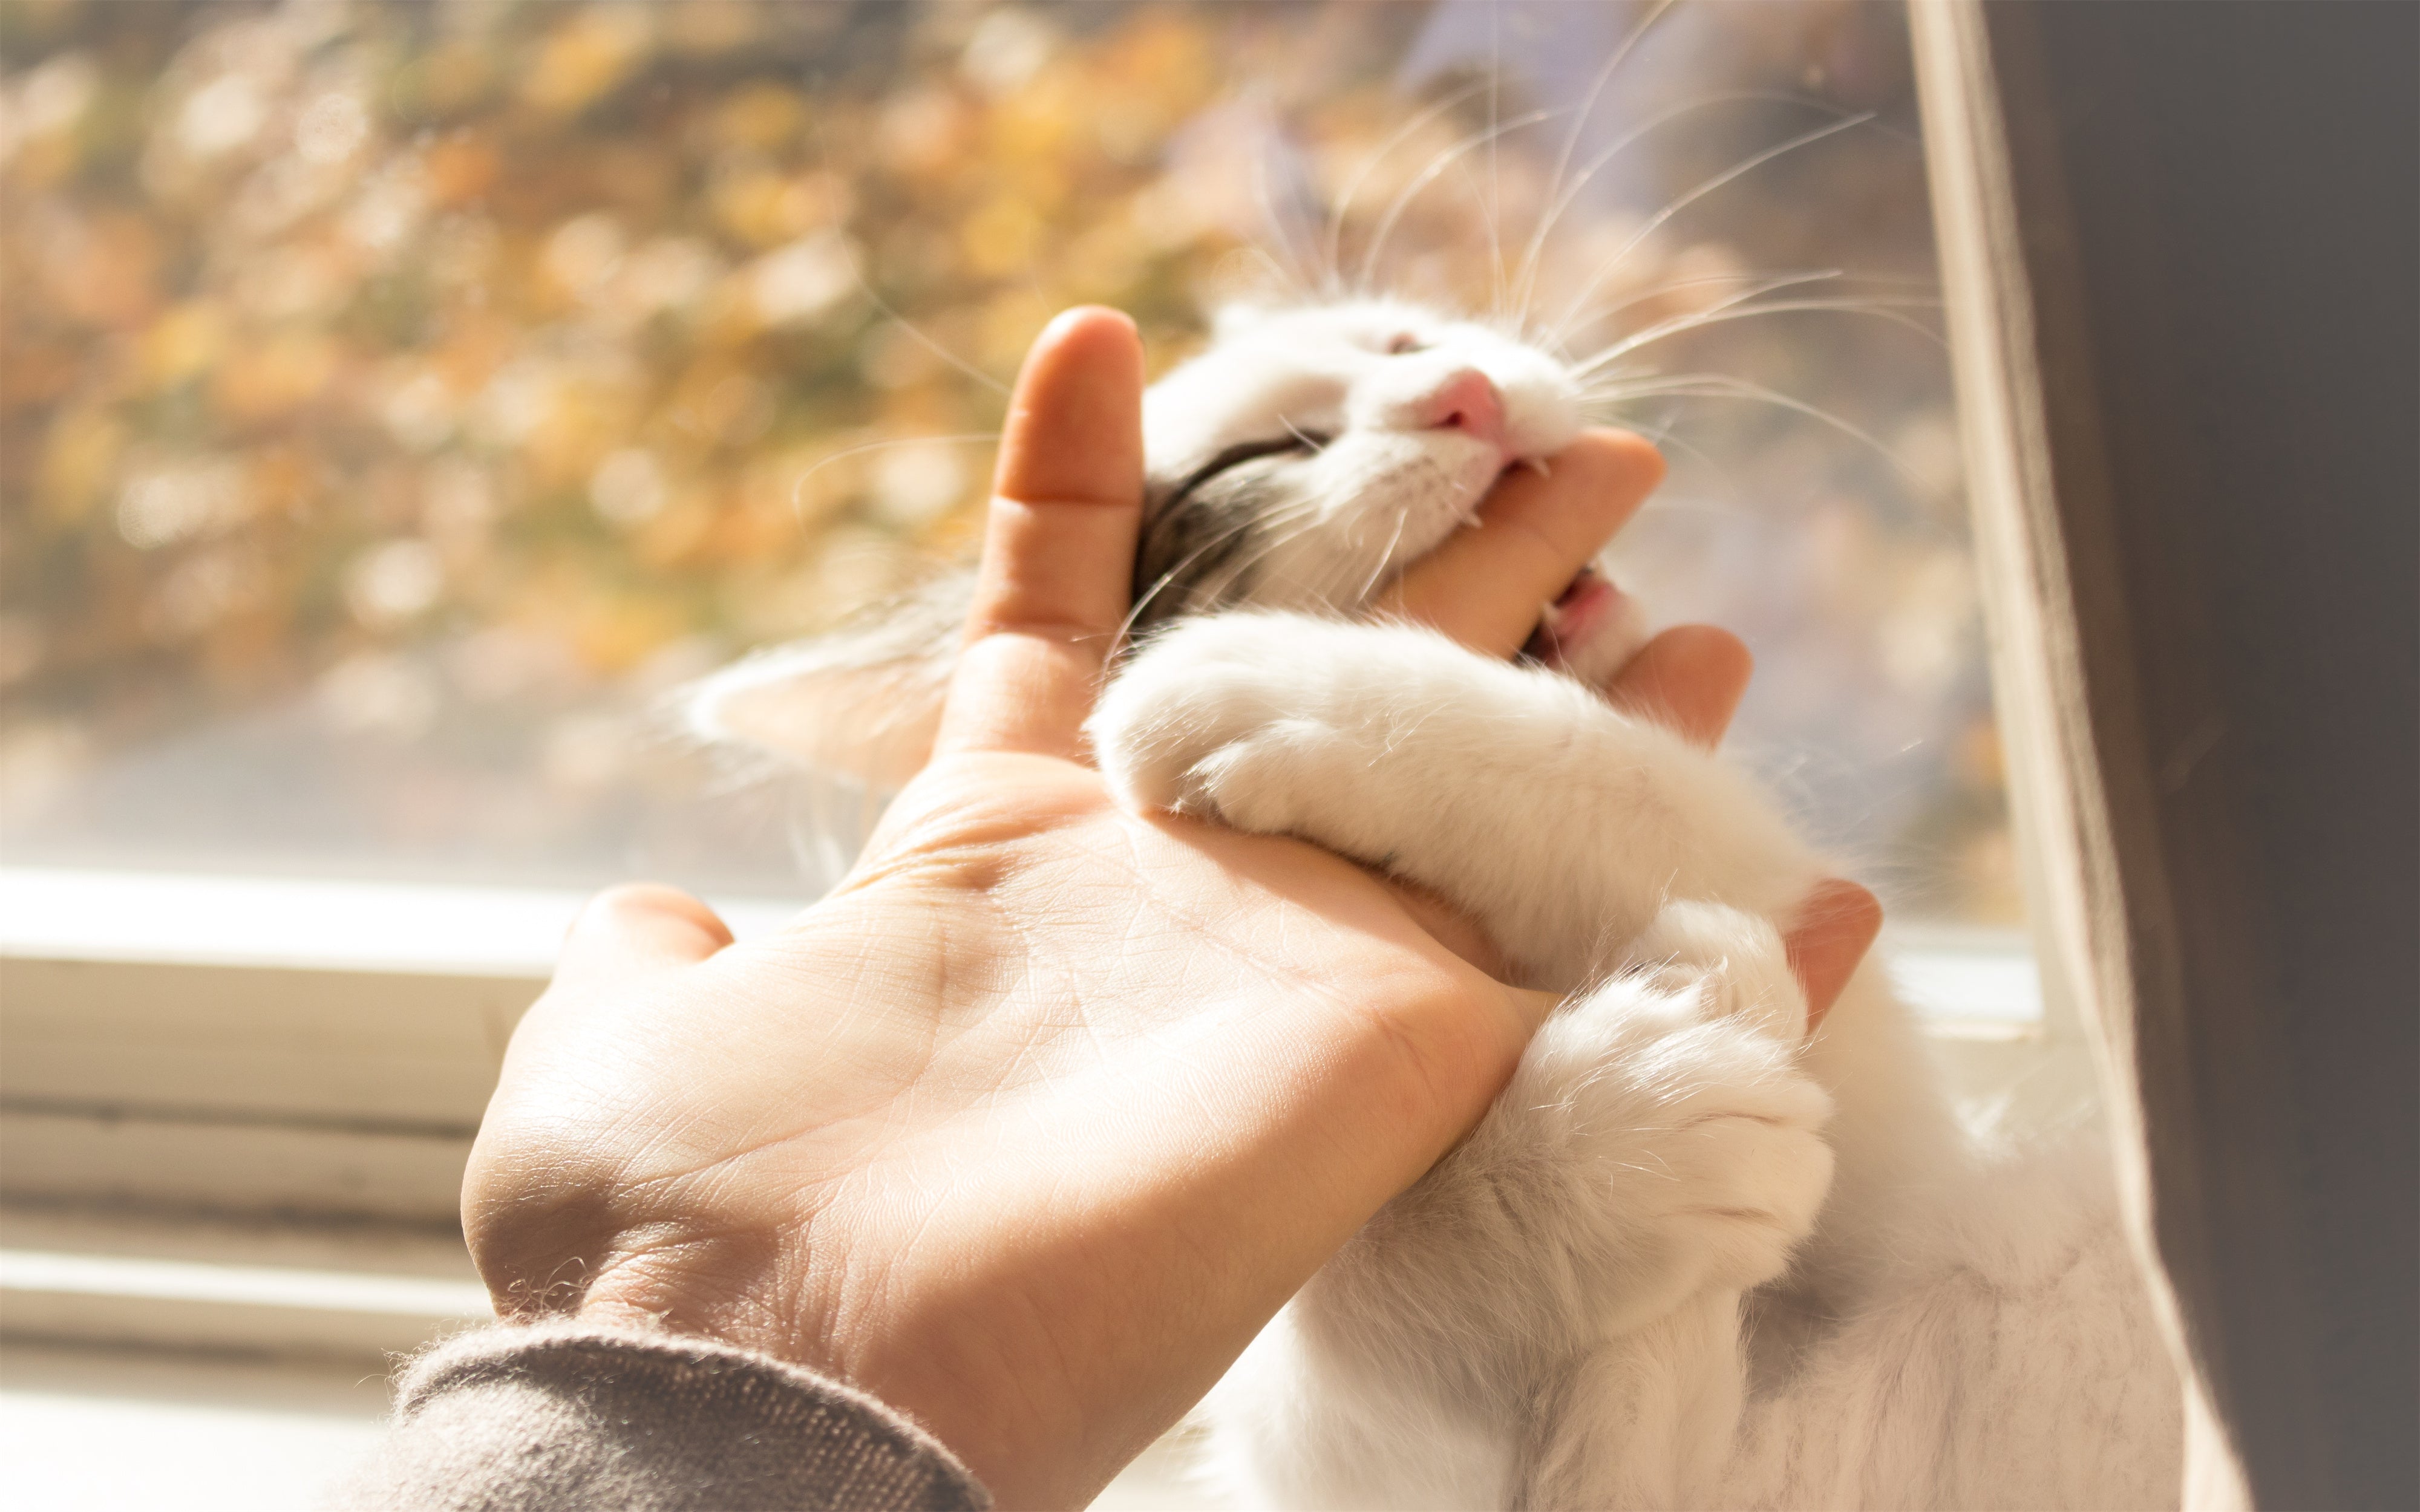 Cat Love Bites: 5 Reasons Why They Do It & How To Respond